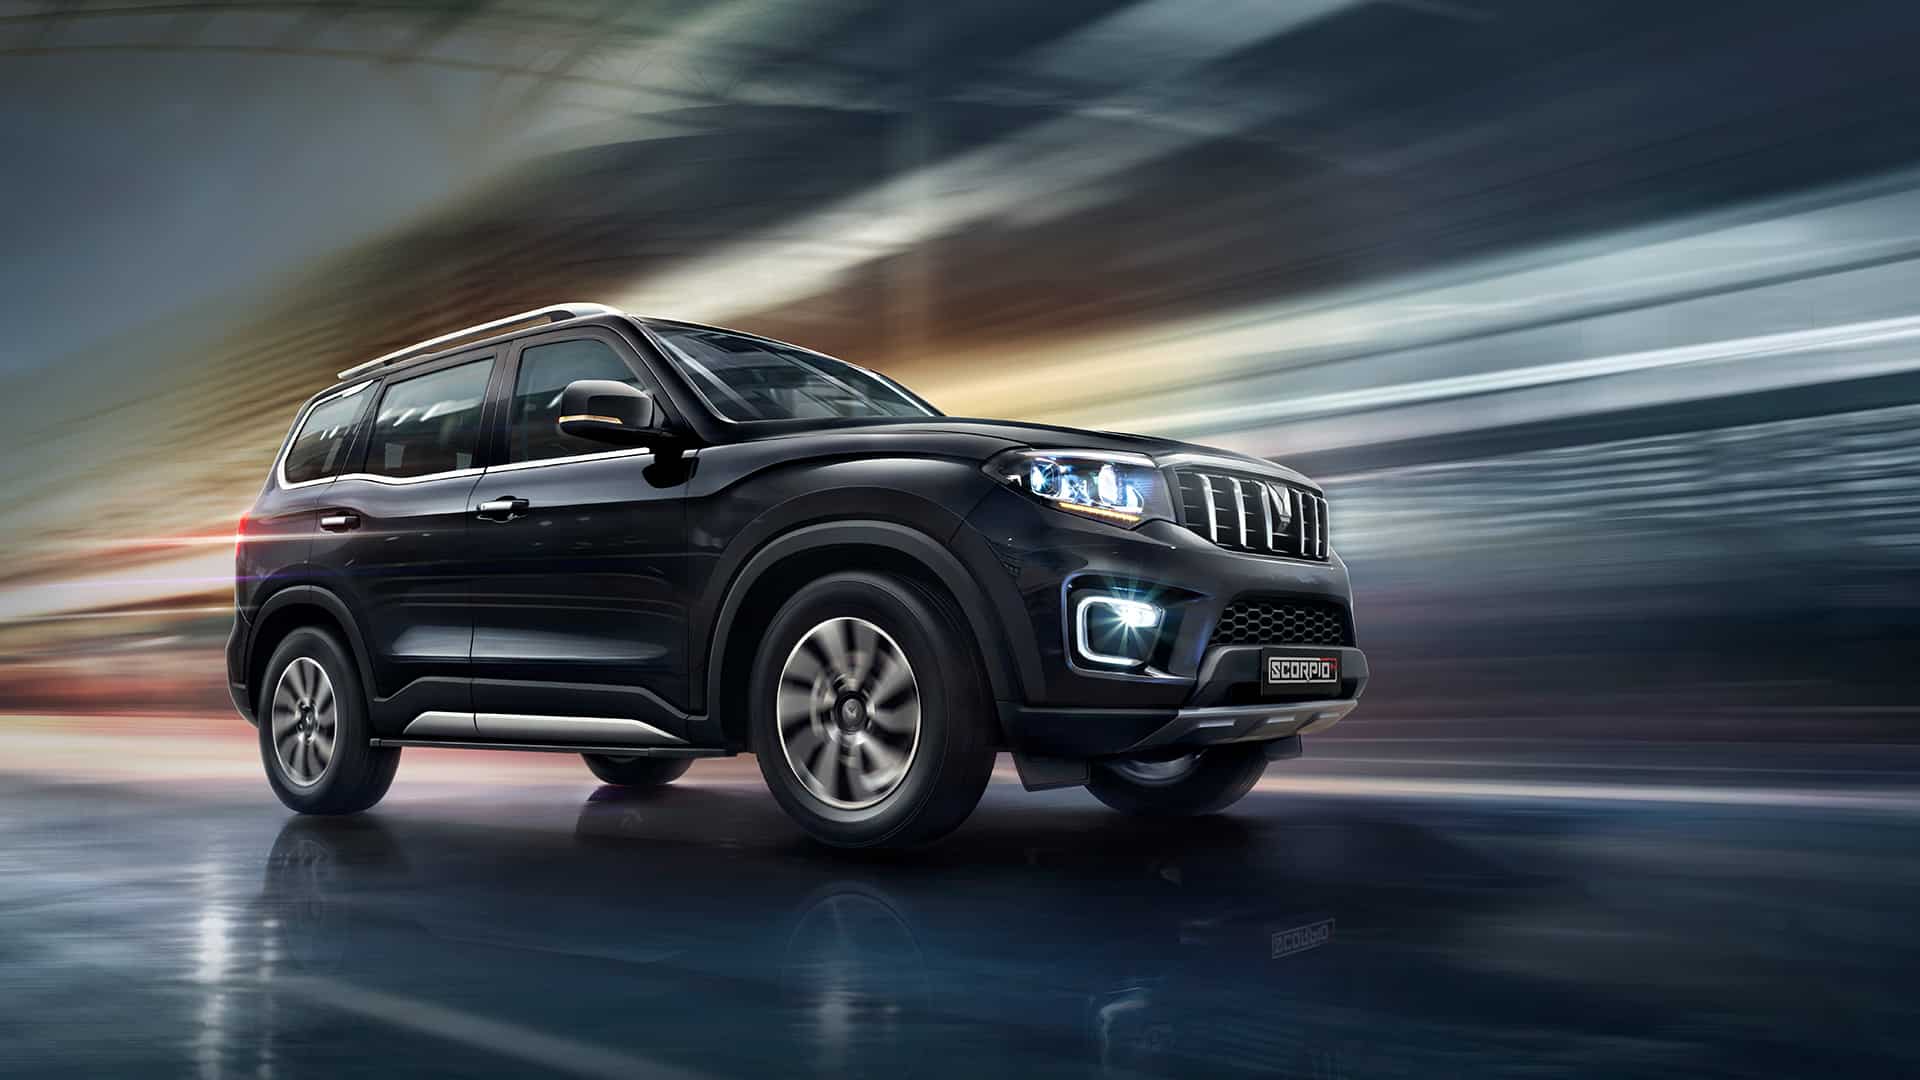 Mahindra Scorpio N Image In HD: Check Interior, Exterior, Price, Performance, Features, And More In Detail